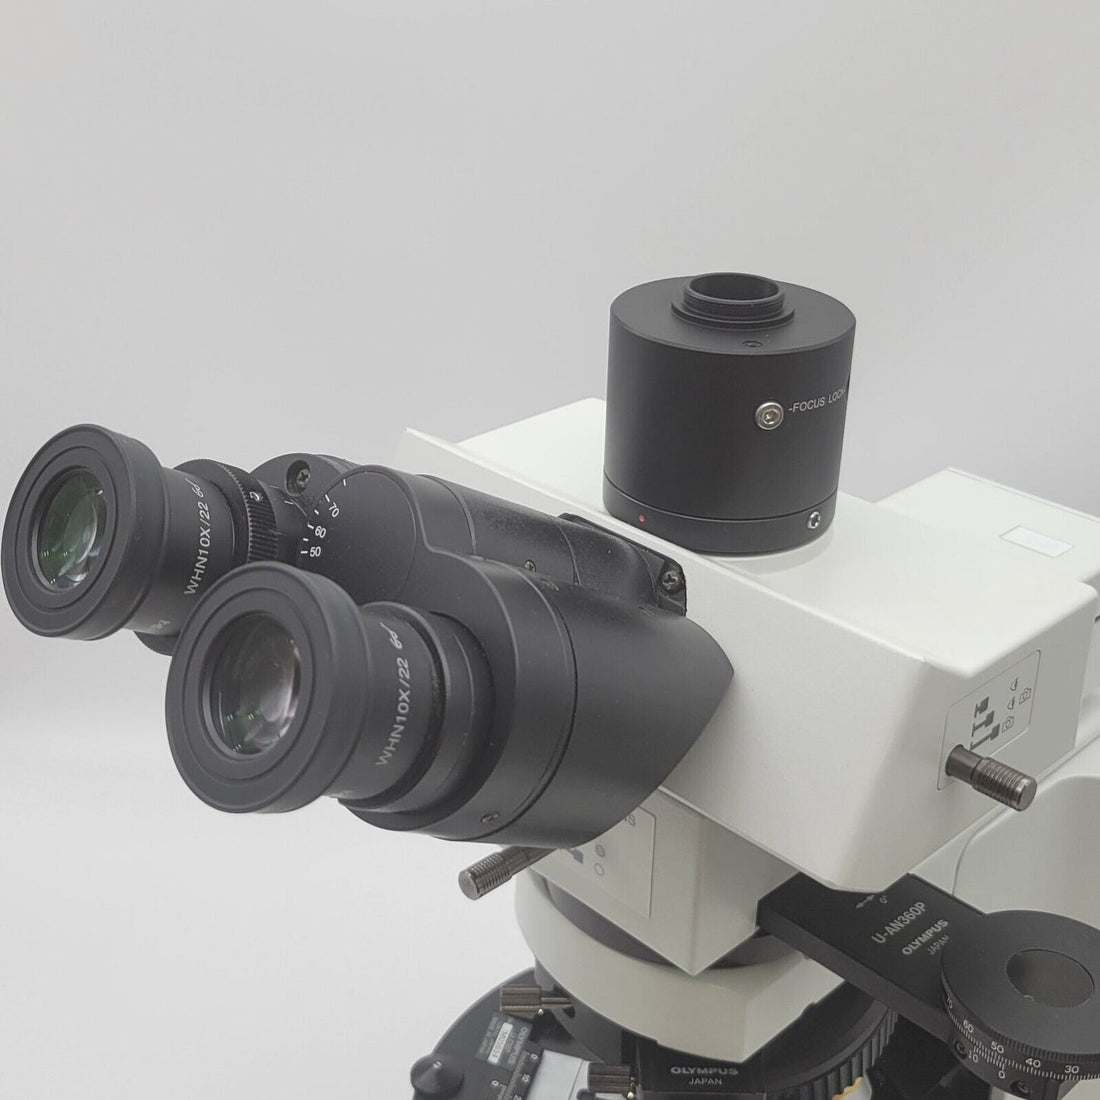 How do I determine the Magnification of my microscope?